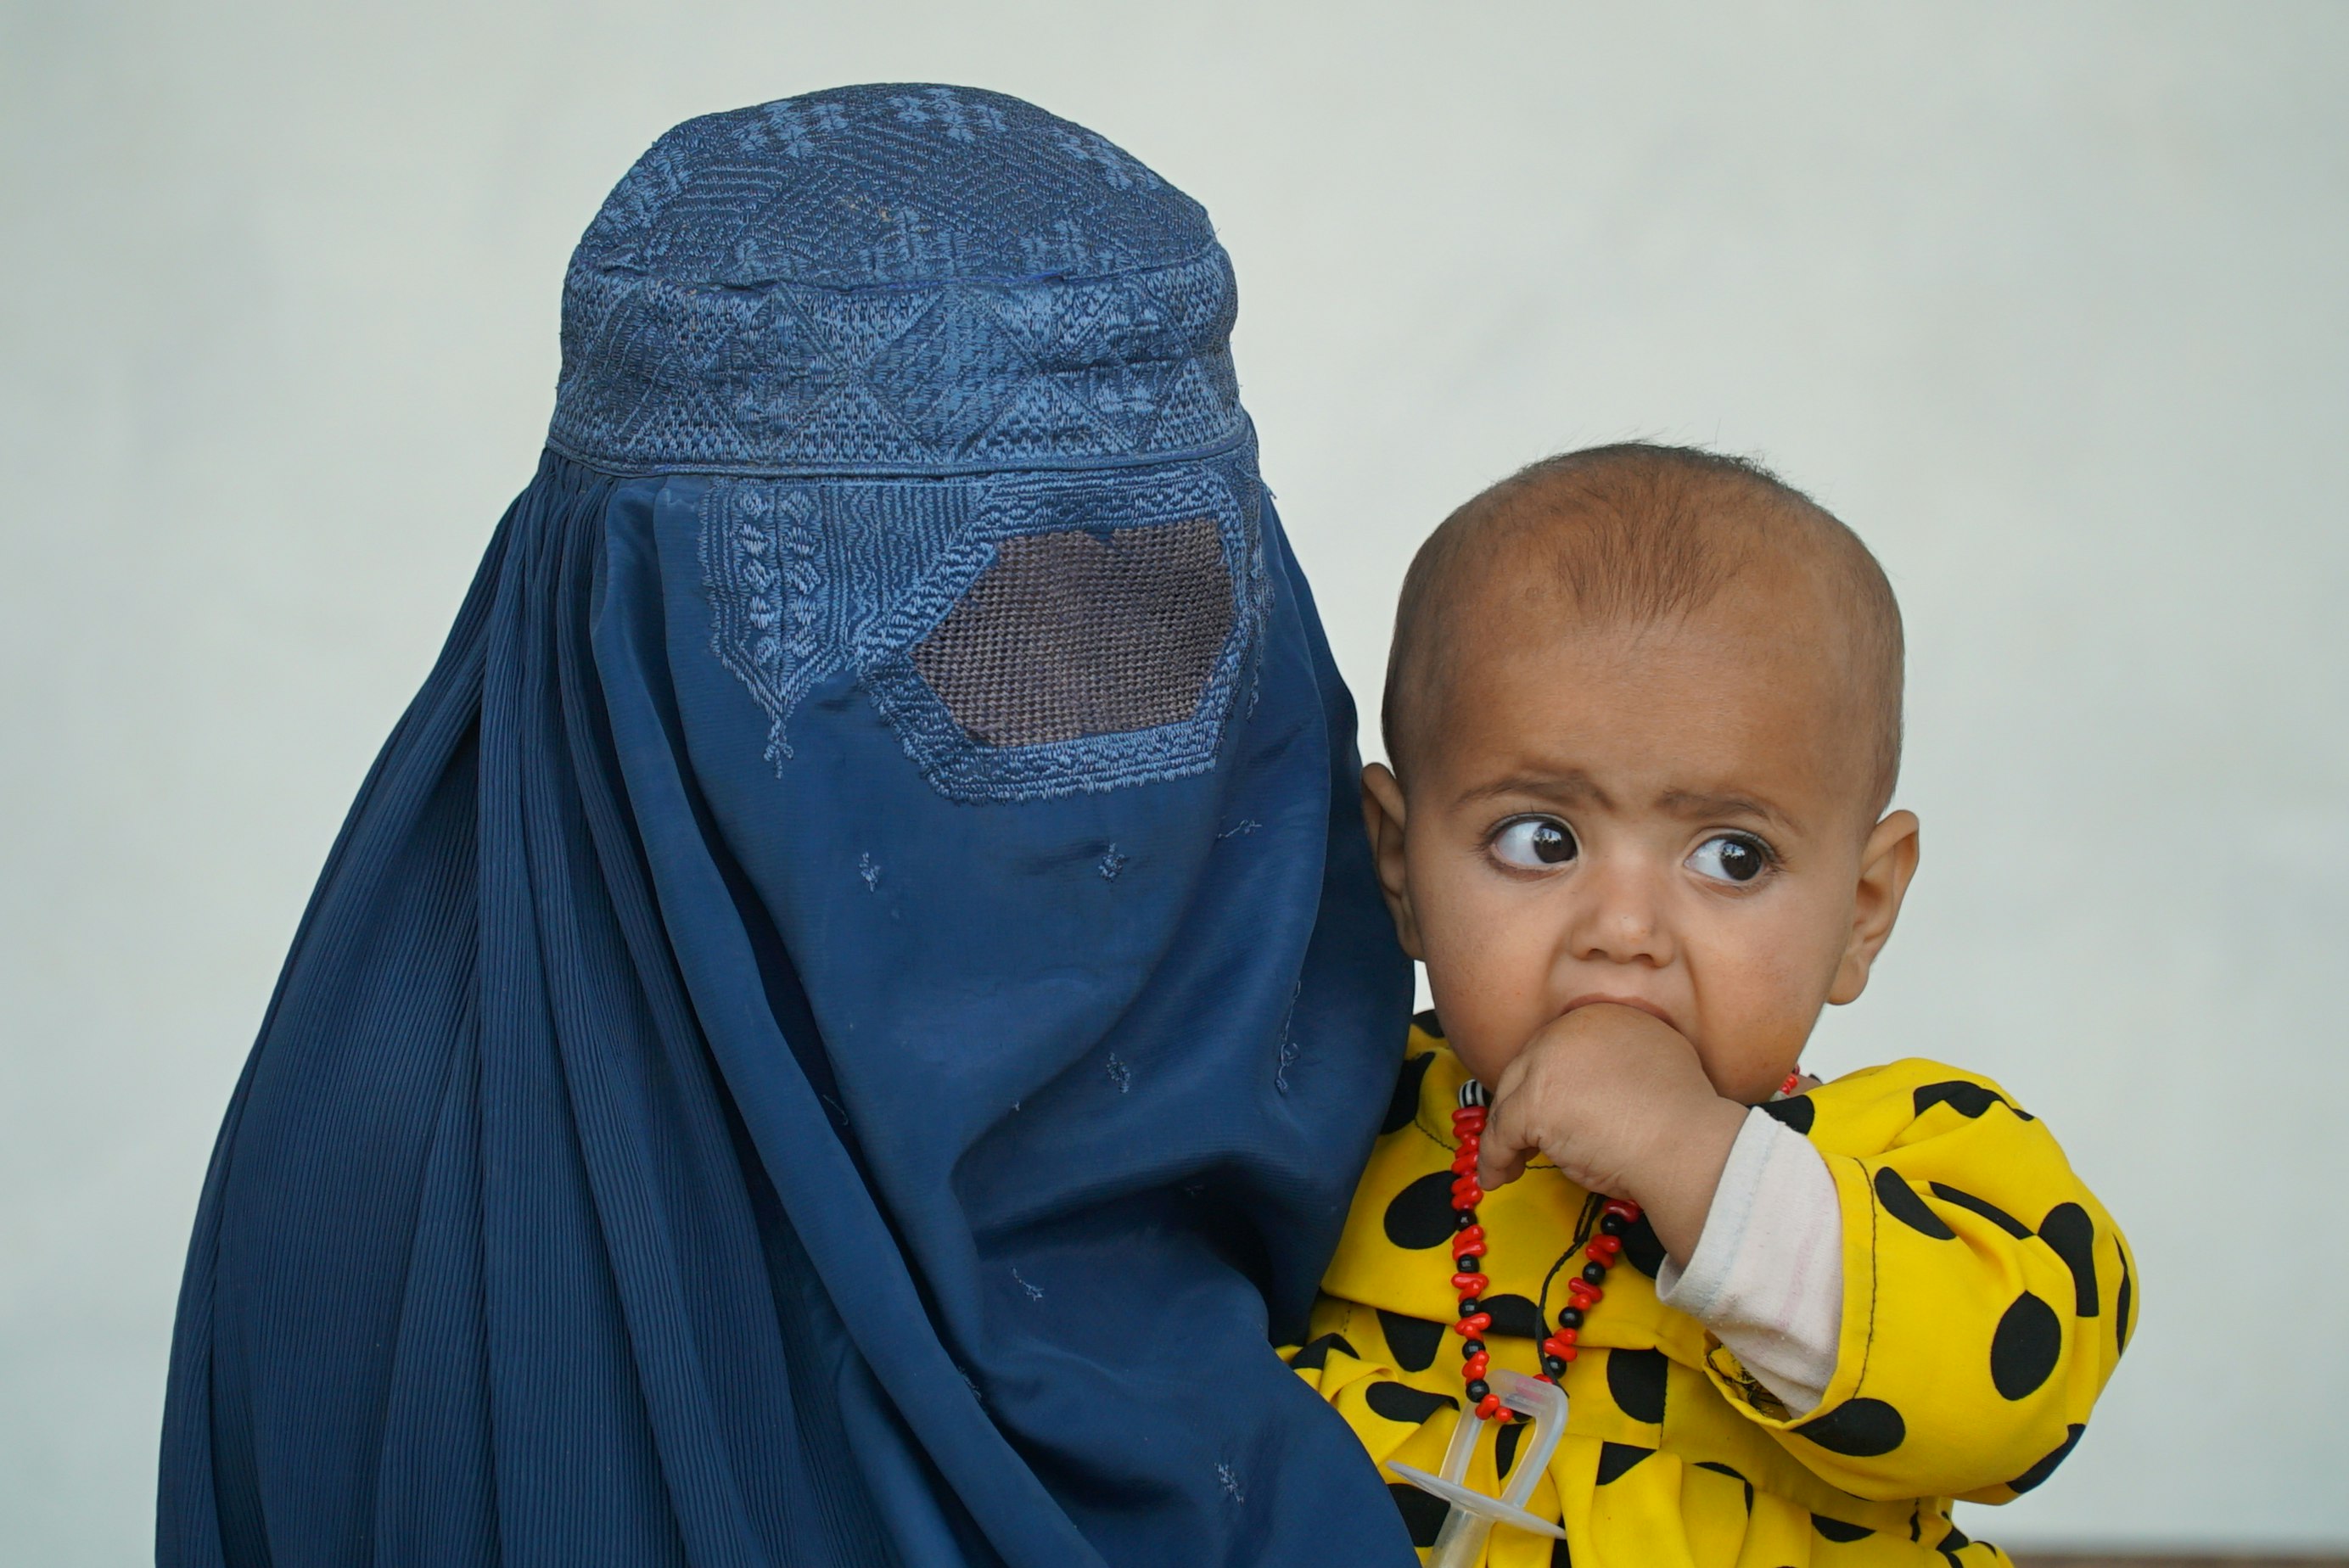 Mother and child at Kabul, Afghanistan